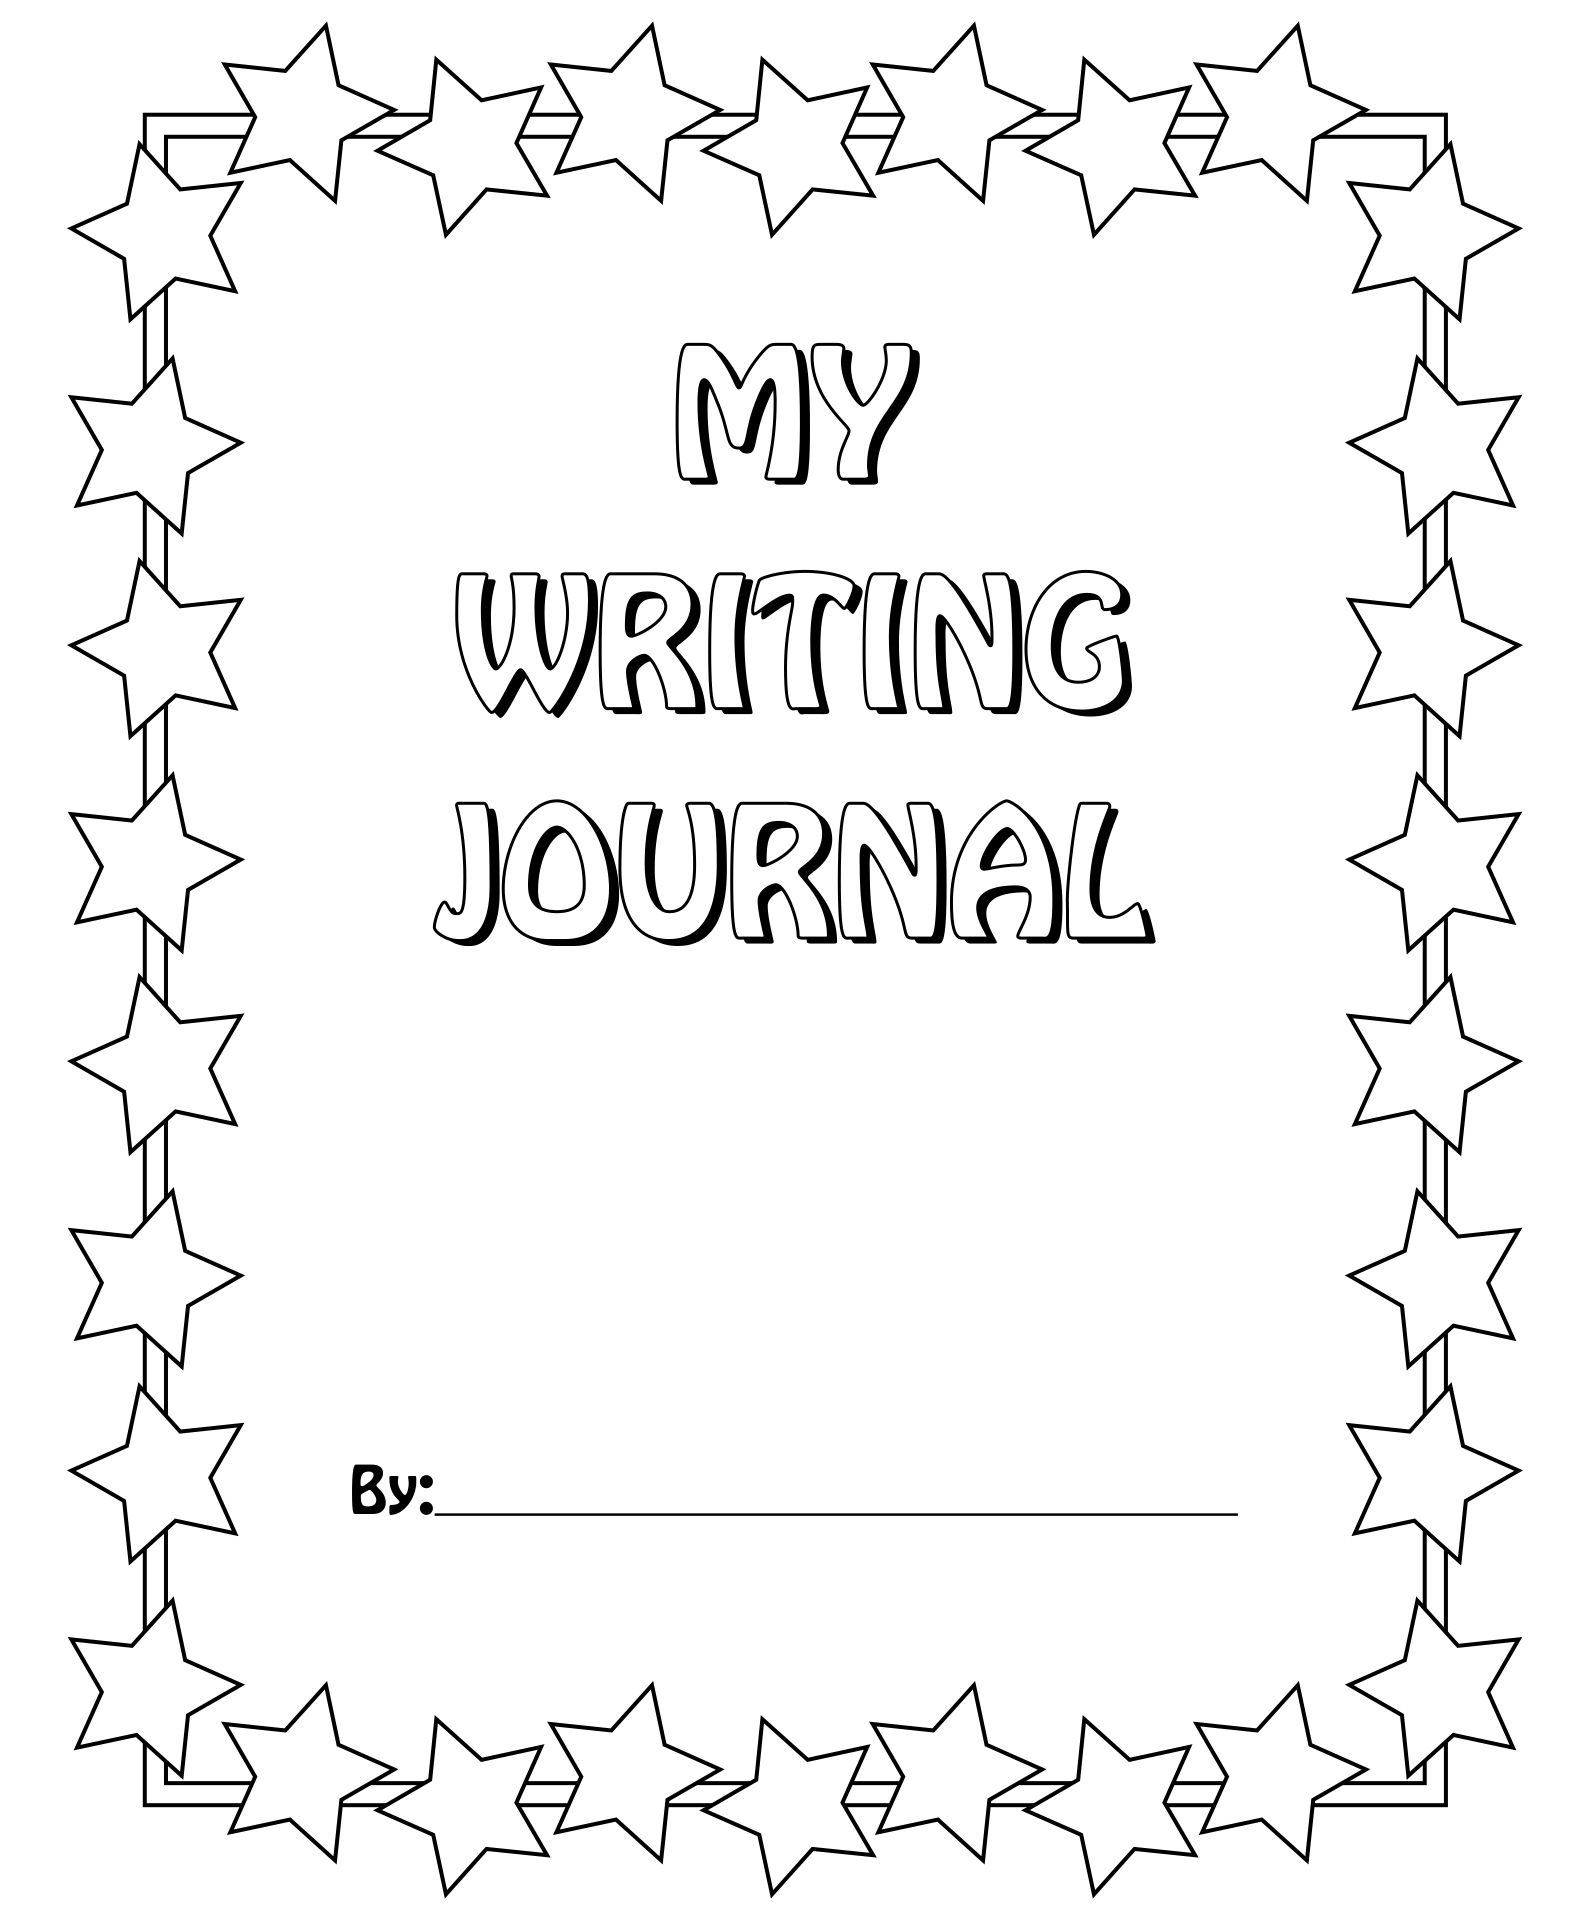 Journal Printable Images Gallery Category Page 1